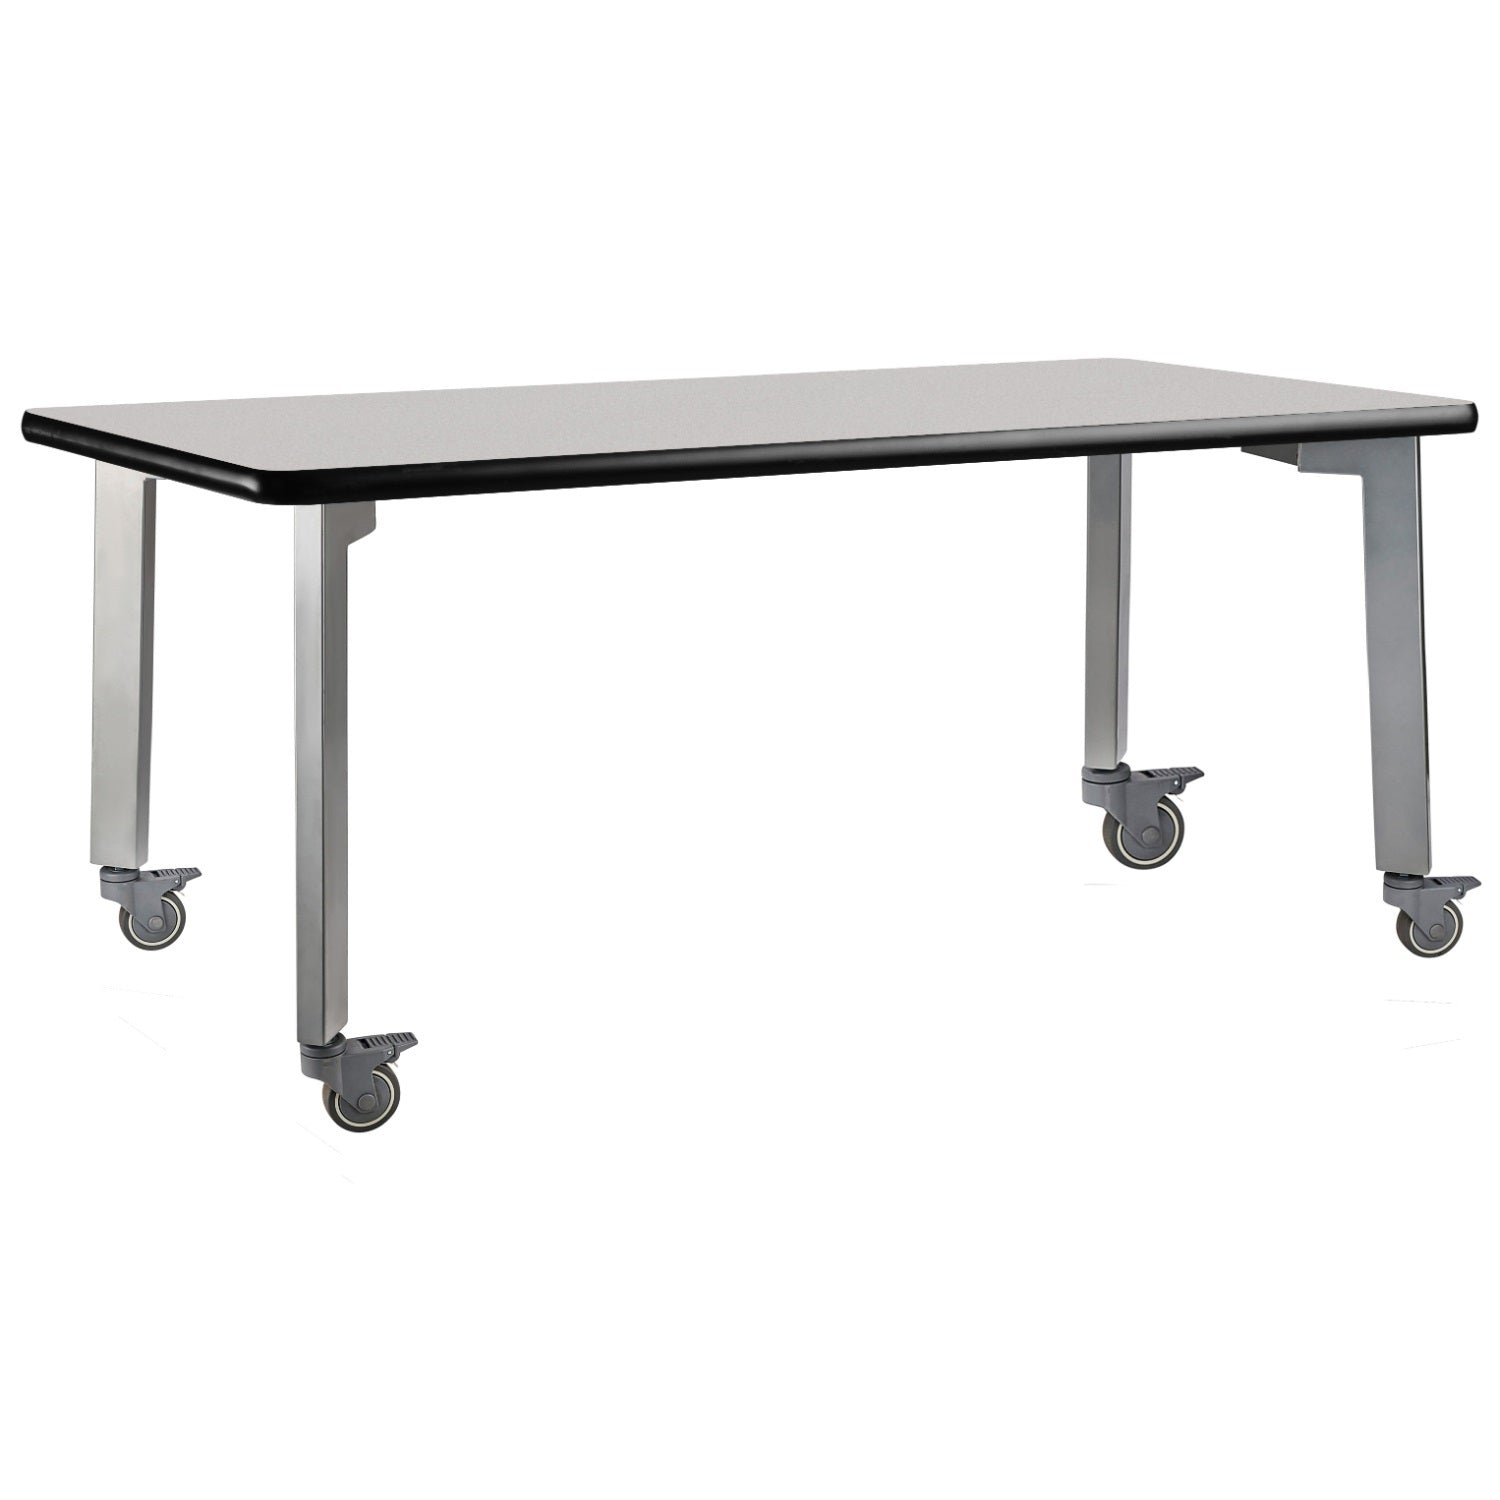 Titan Mobile Table, 42" x 48", Standard High Pressure Laminate Top with Particleboard Core and T-Mold Edge